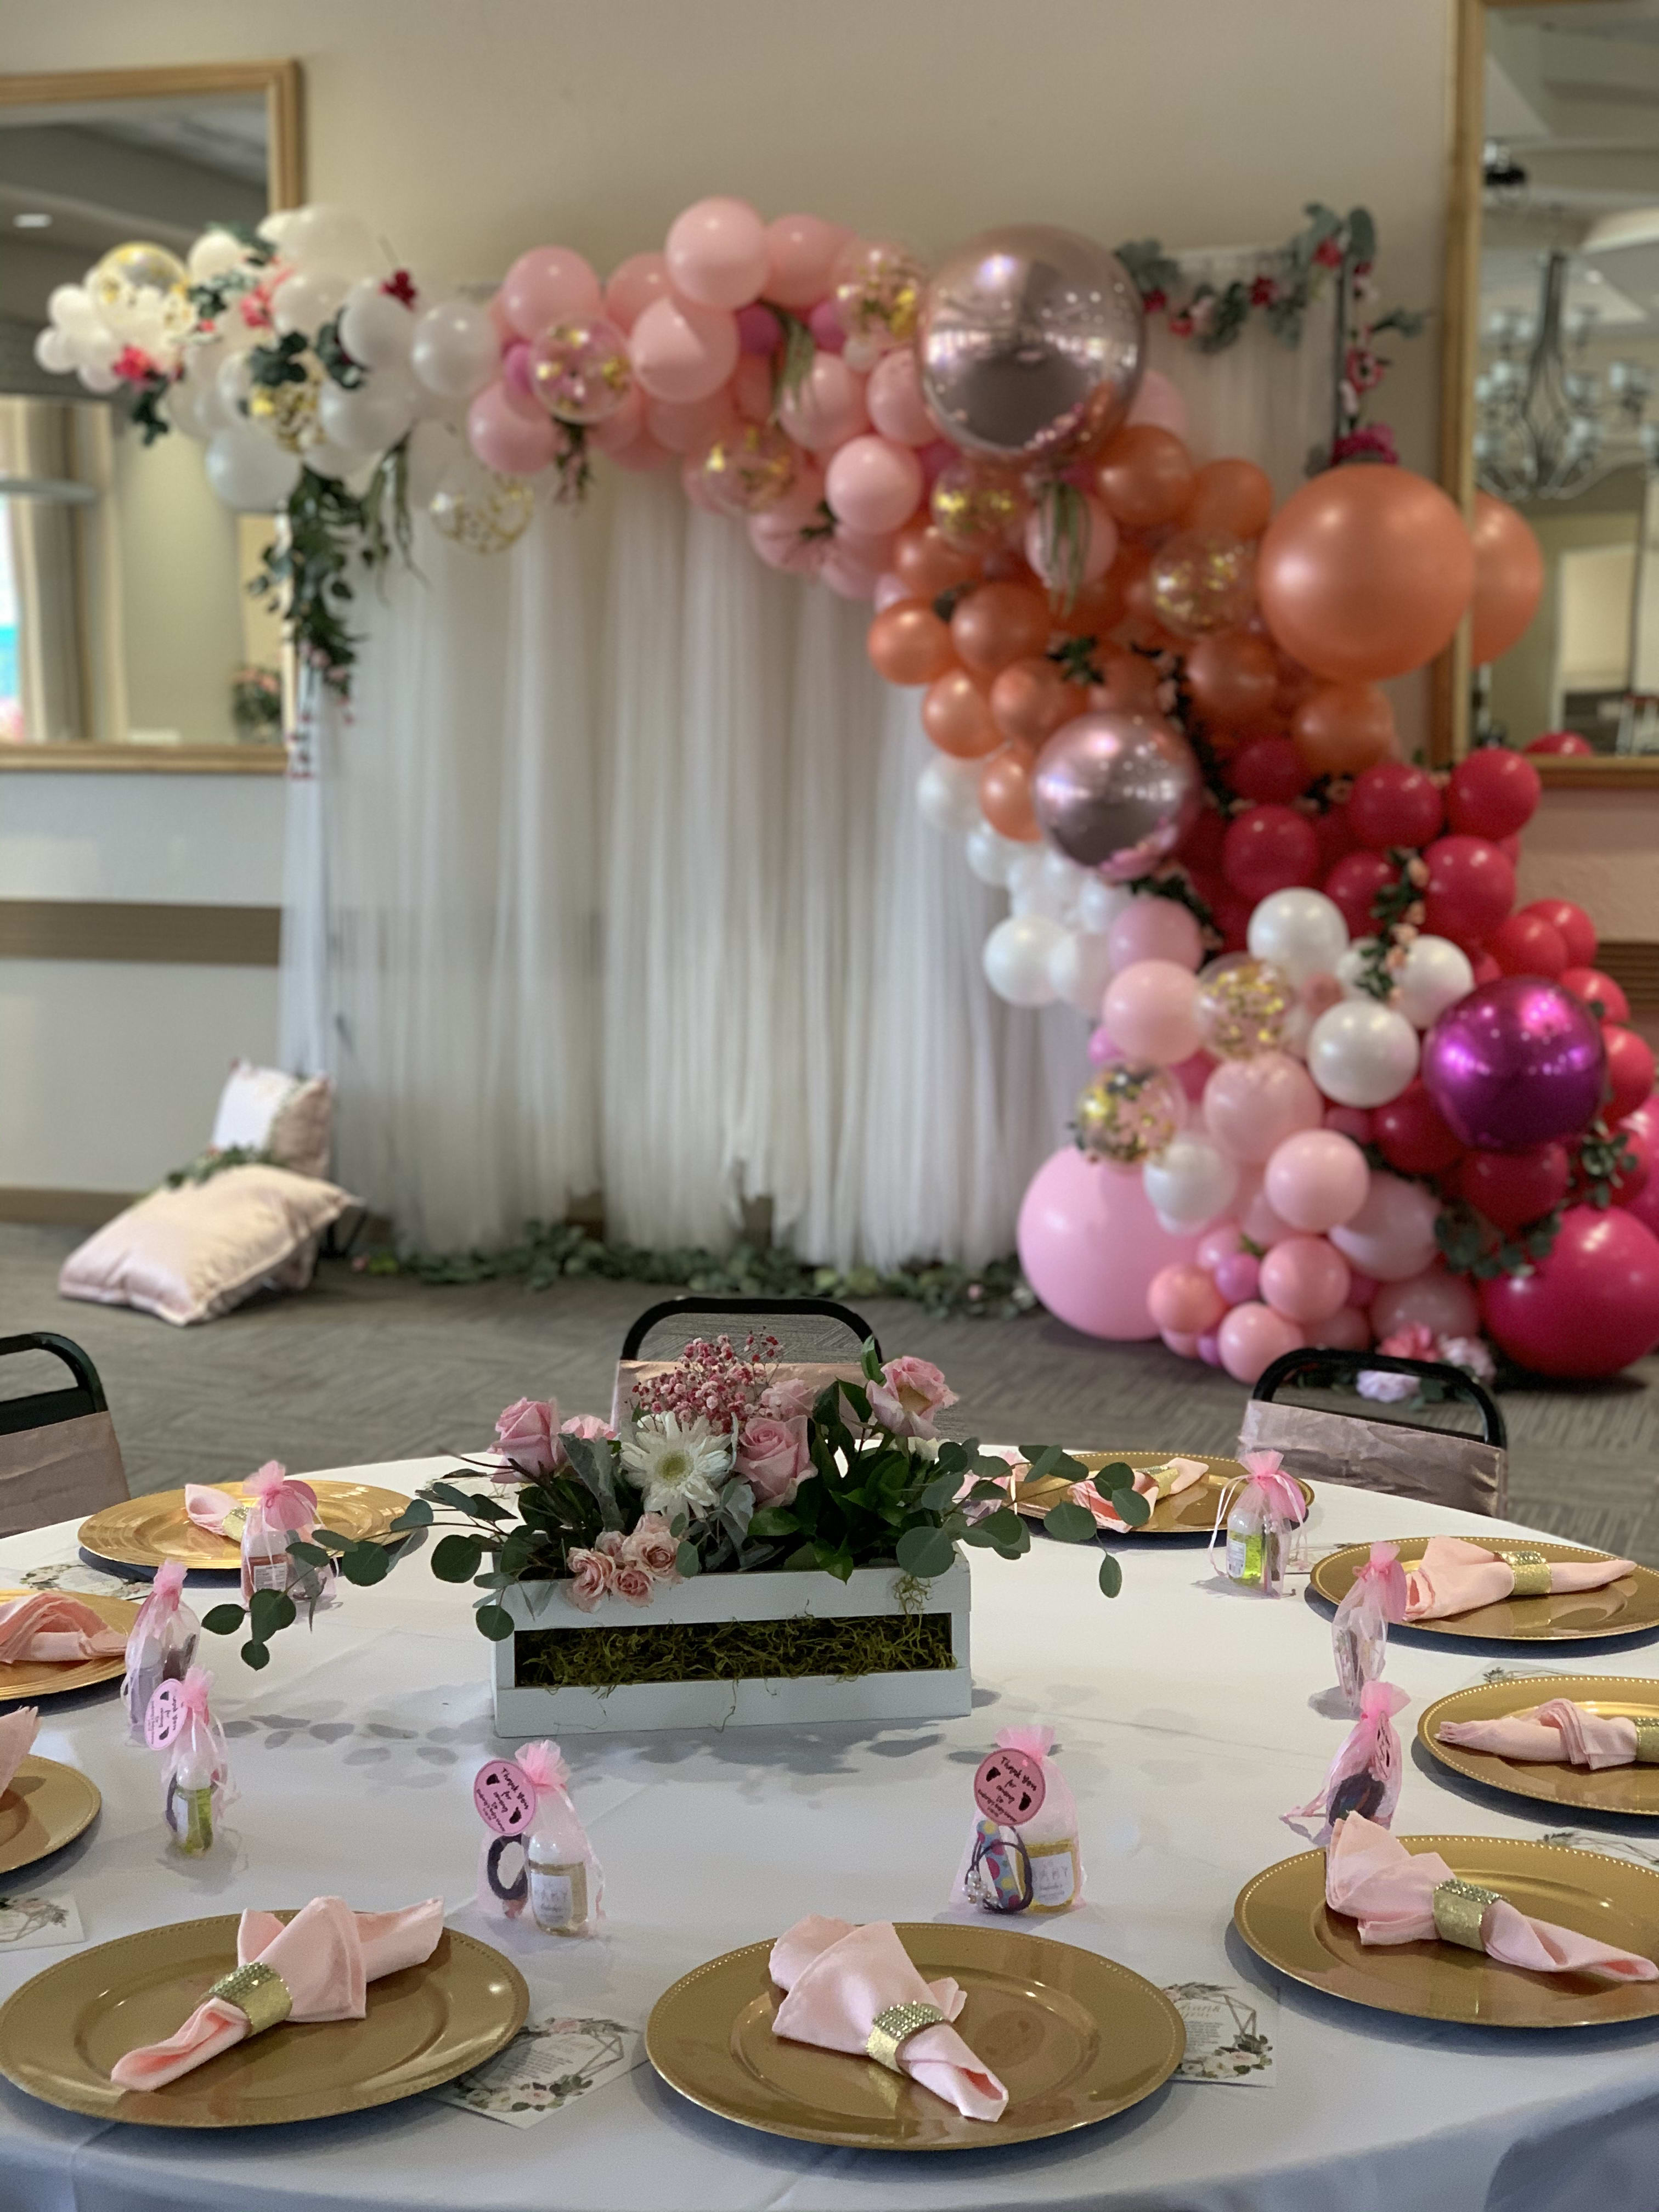 Package deal. A backdrop, balloon garland and 5 table centerpieces.